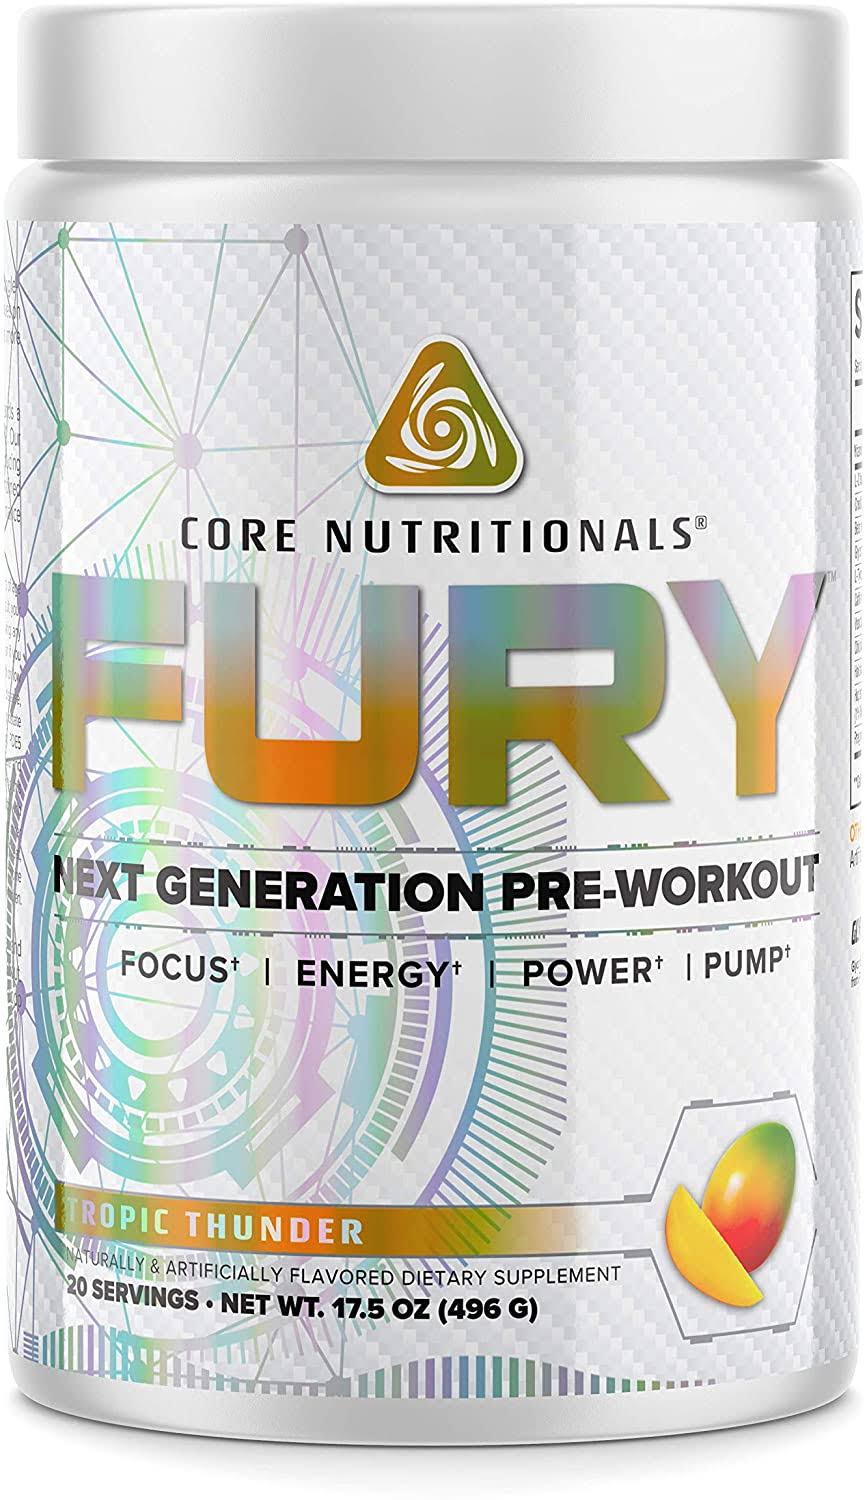 Core Nutritionals Fury Platinum Next Gen Pre Workout 20 Fully Dosed